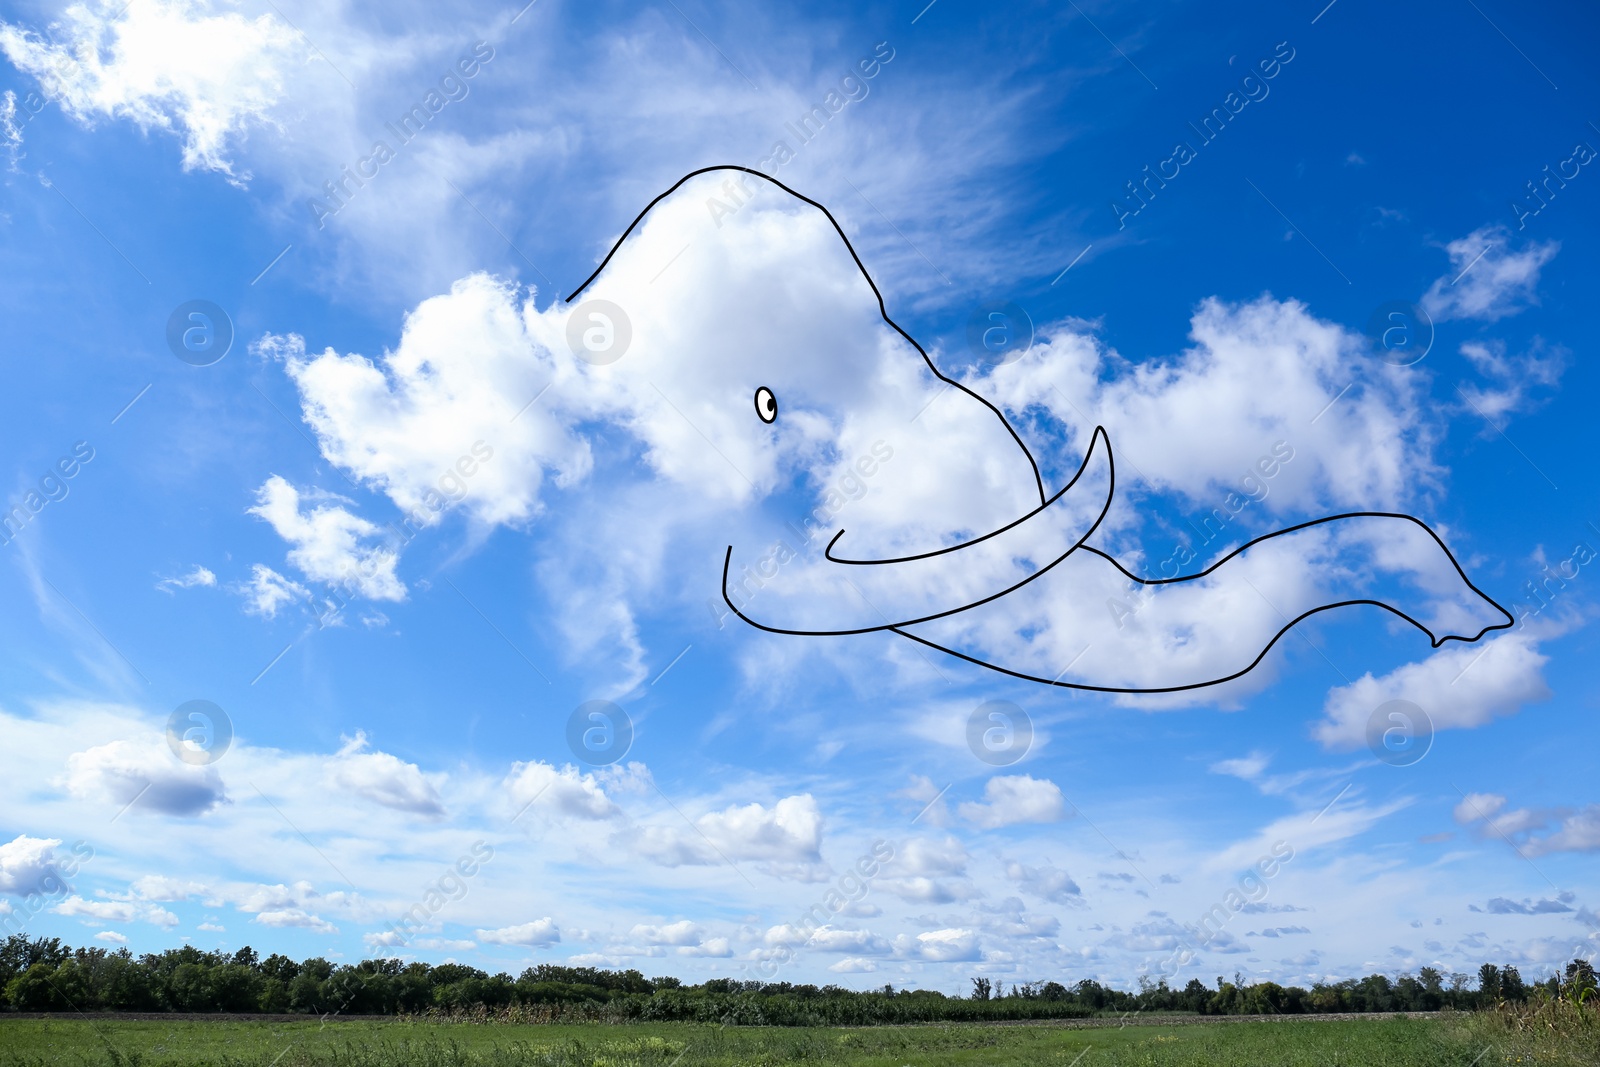 Image of Imagination and creativity. Fluffy cloud in shape of elephant with drawn outline in blue sky above field